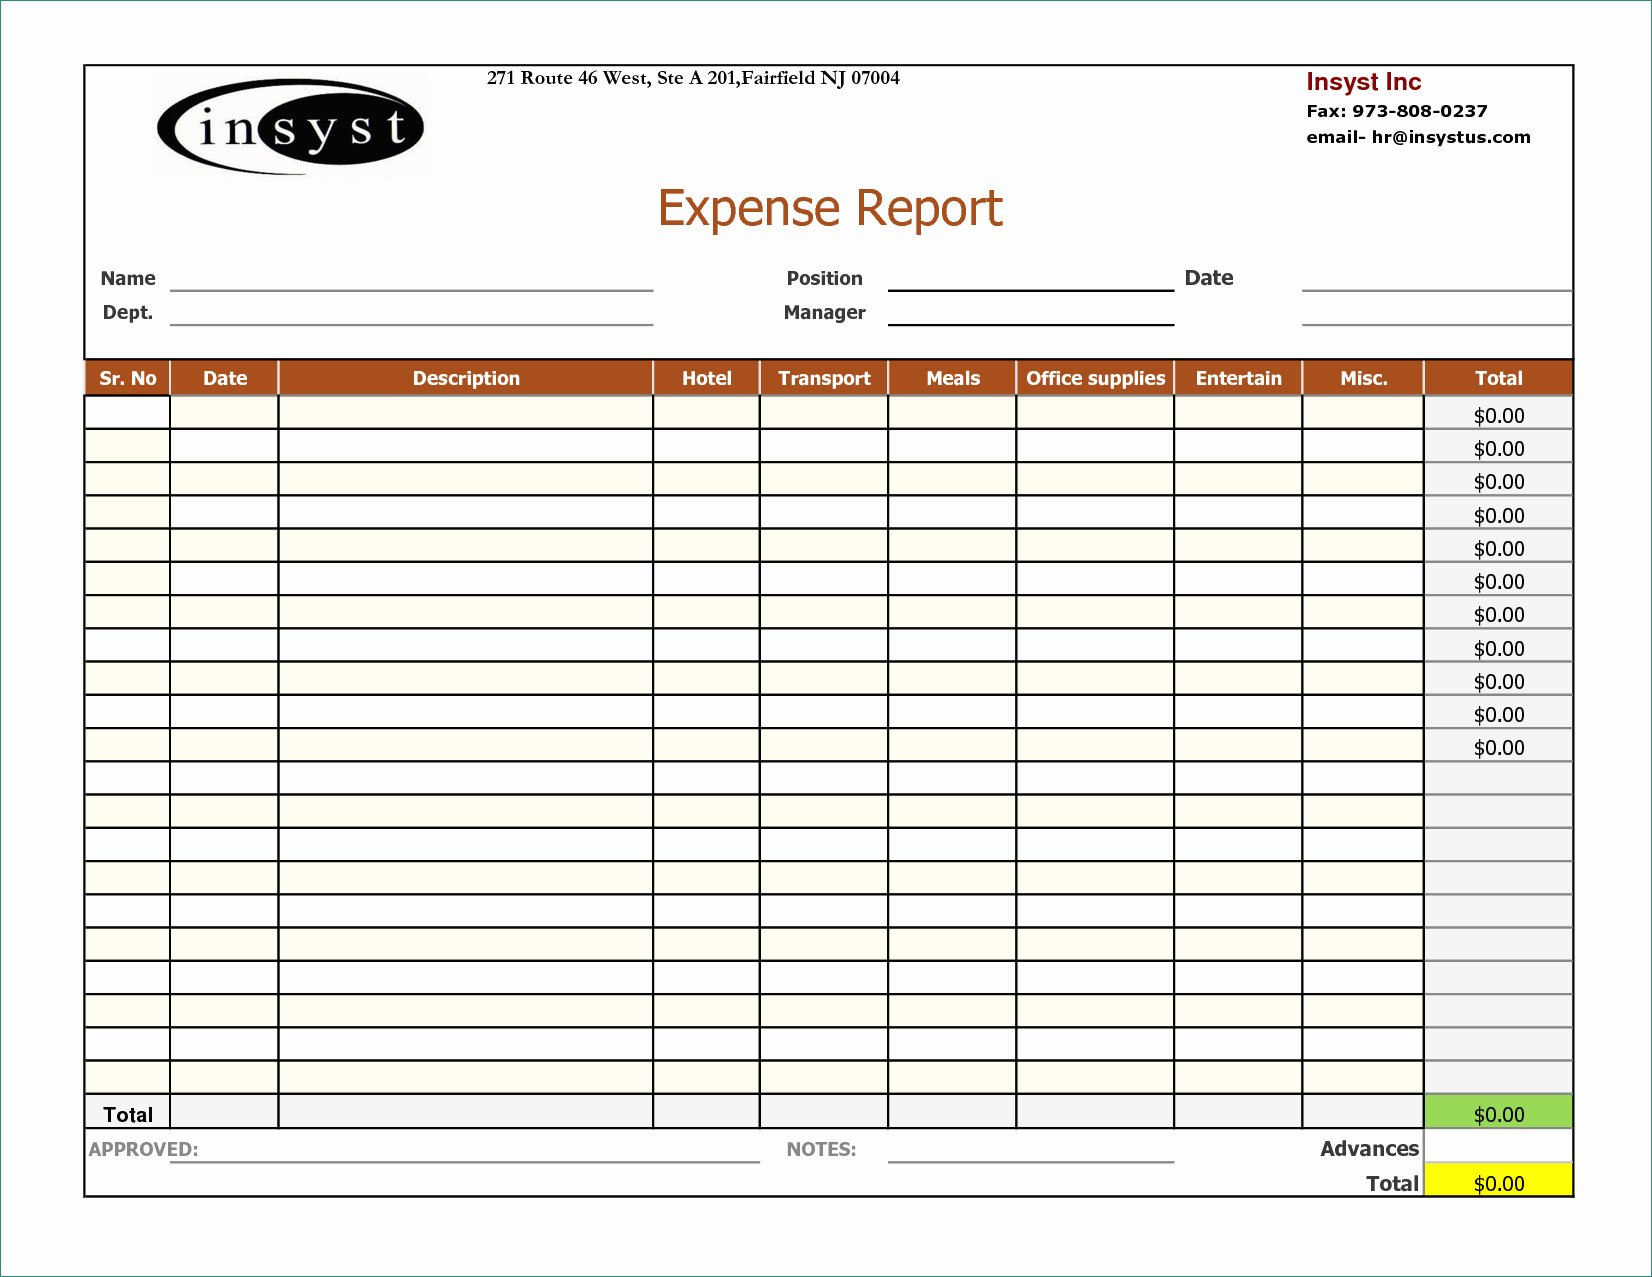 040 Expense Report Templates Excel Template Ideas Of Within Expense Report Template Excel 2010